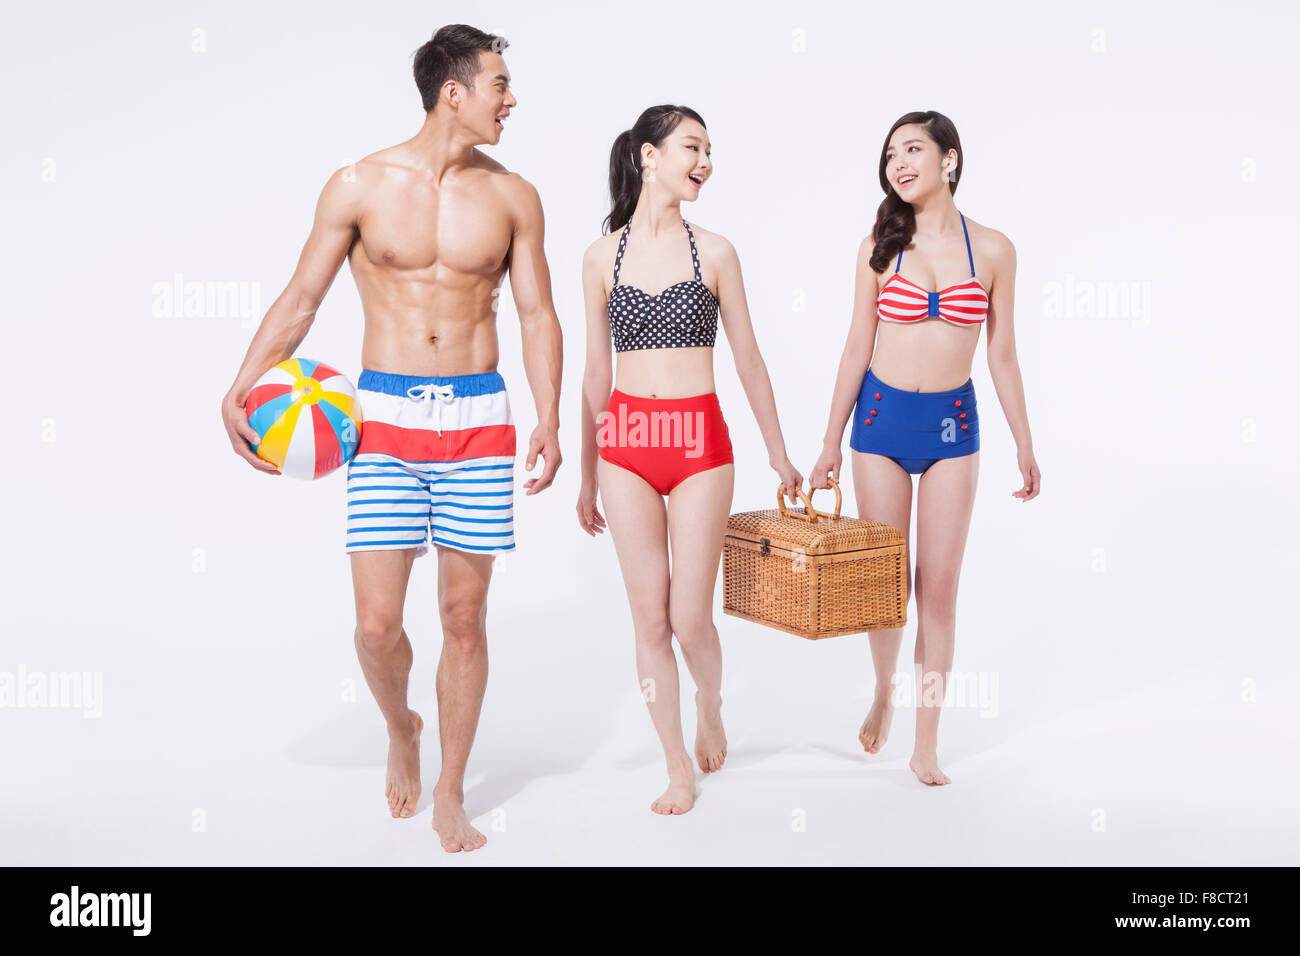 Man in swimming pants holding a beach ball and two women holding a picnic basket together all walking together Stock Photo